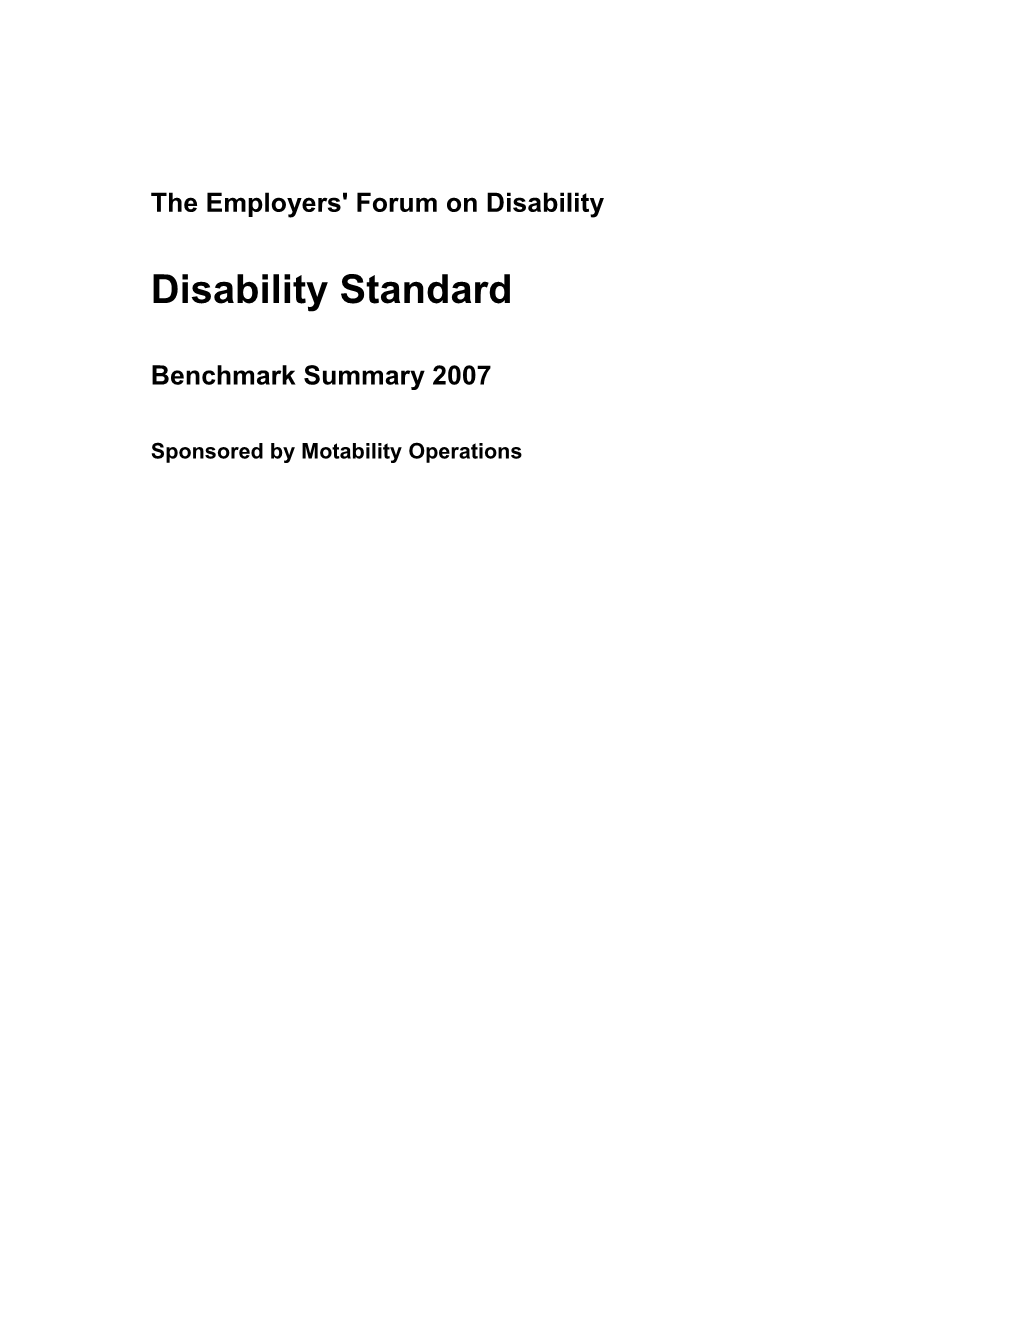 The Employers' Forum on Disability